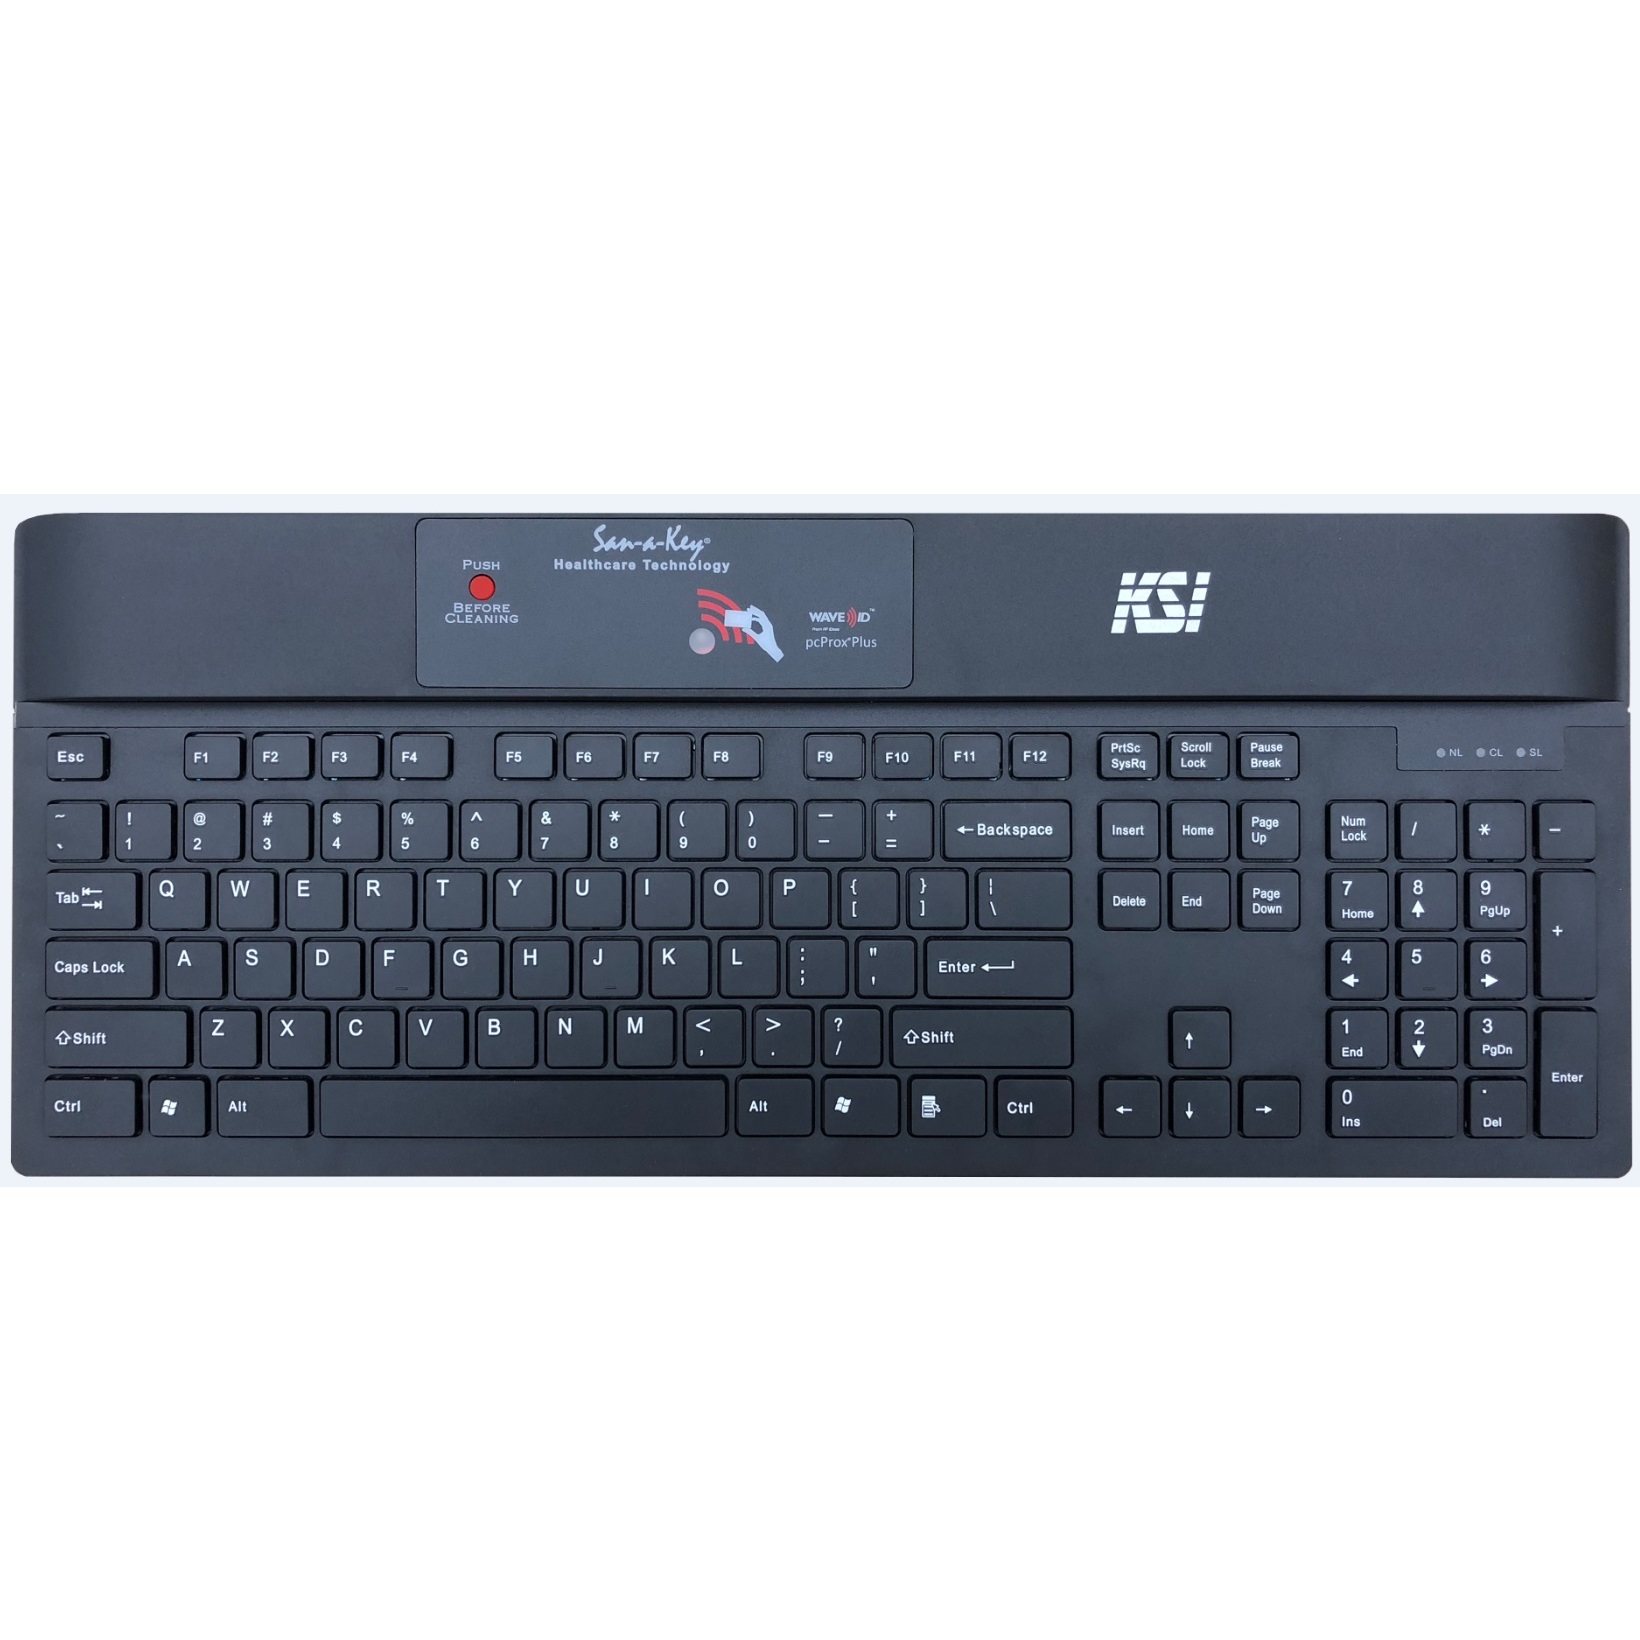 KSI 1700 Disinfect-able Keyboard with Contactless RFIDeas 80582 Dual Band Card Reader USB